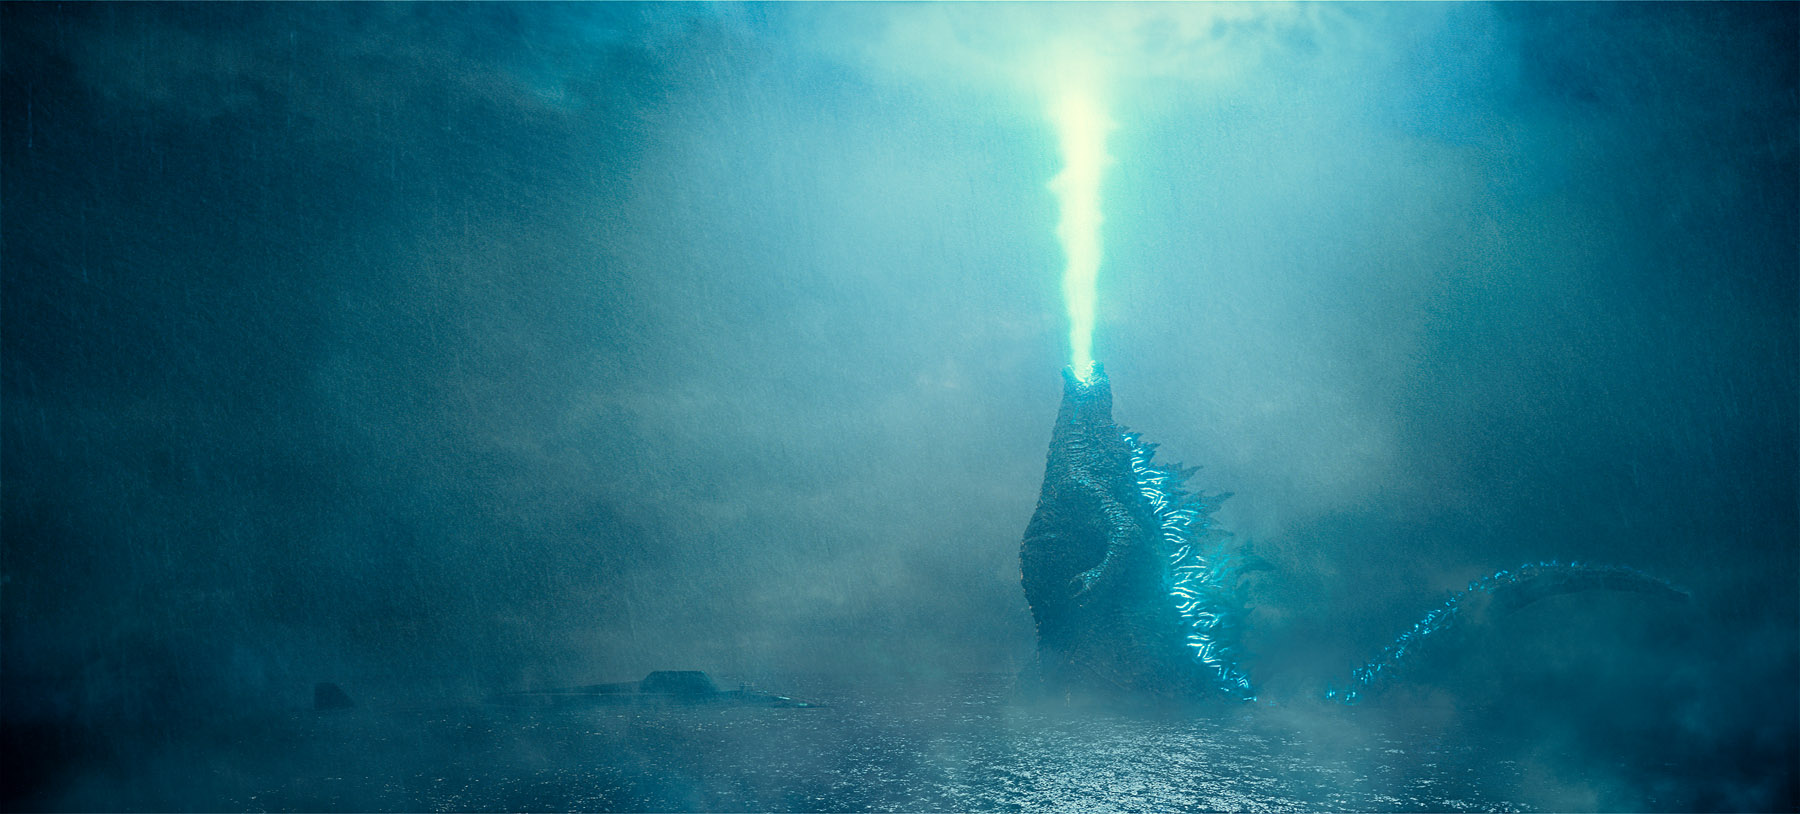 Godzilla Fights His Way To $6.3M In Thursday Ticket Sales